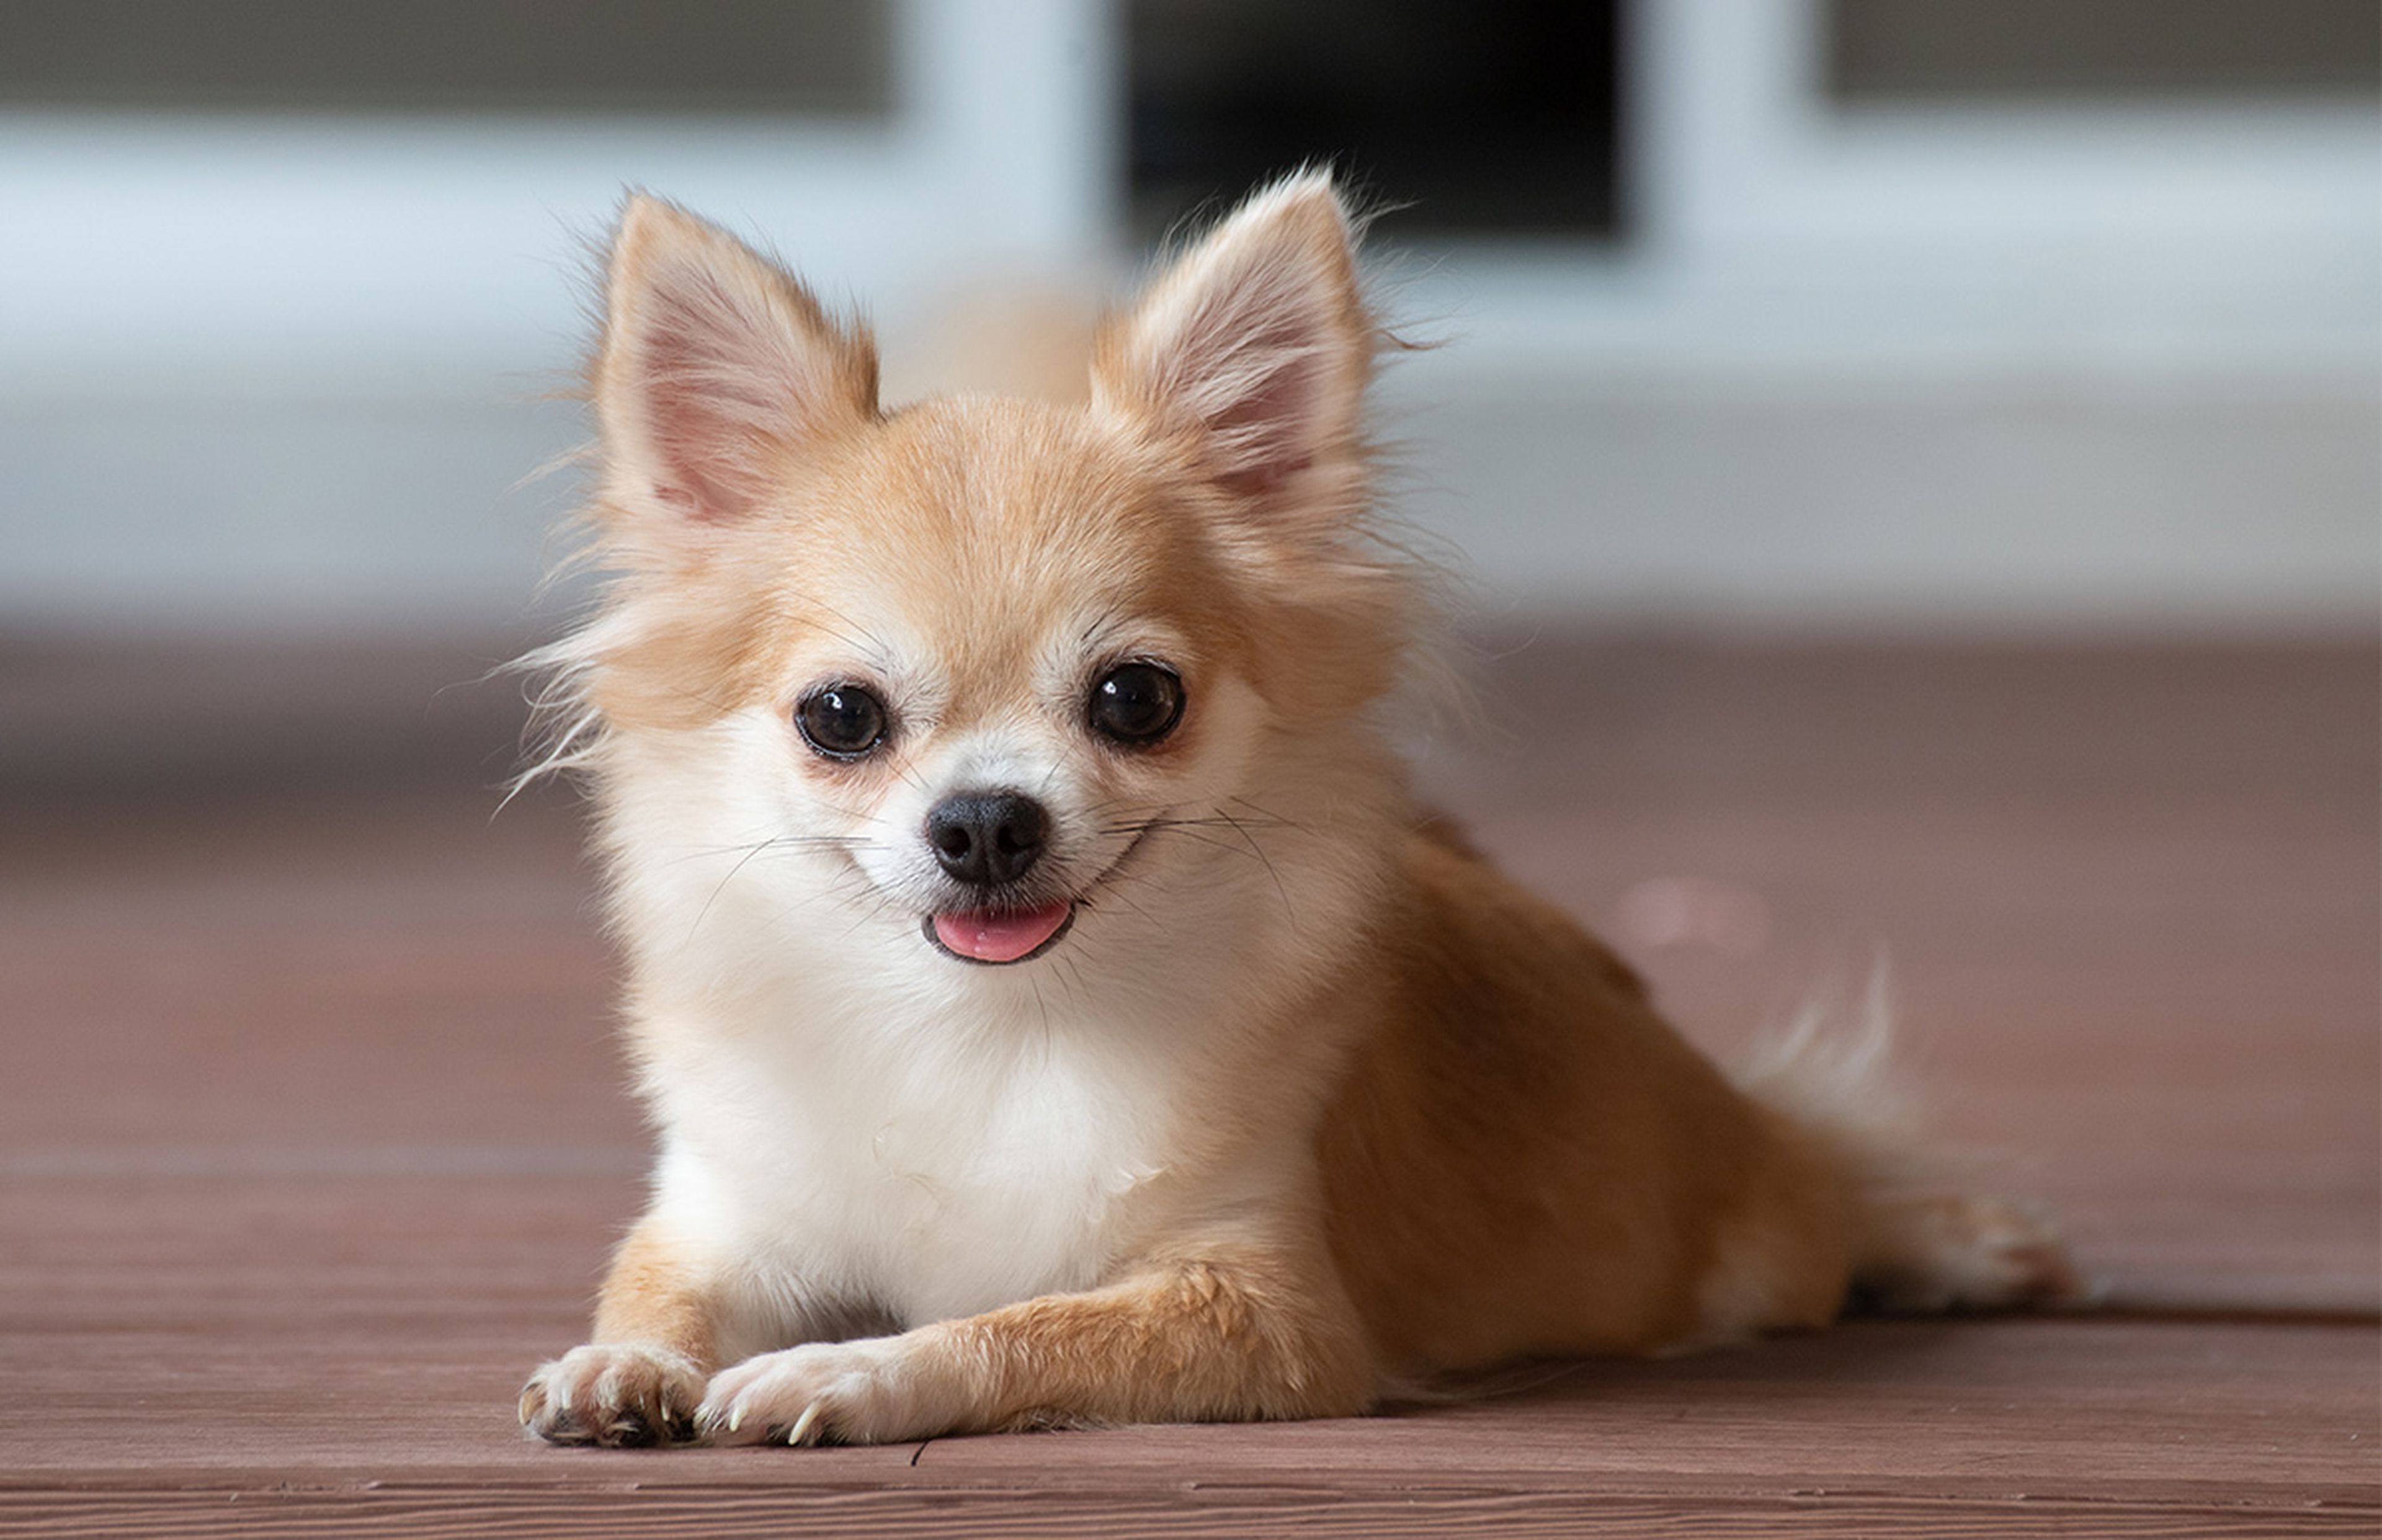 A happy chihuahua laying on a wooden floor.